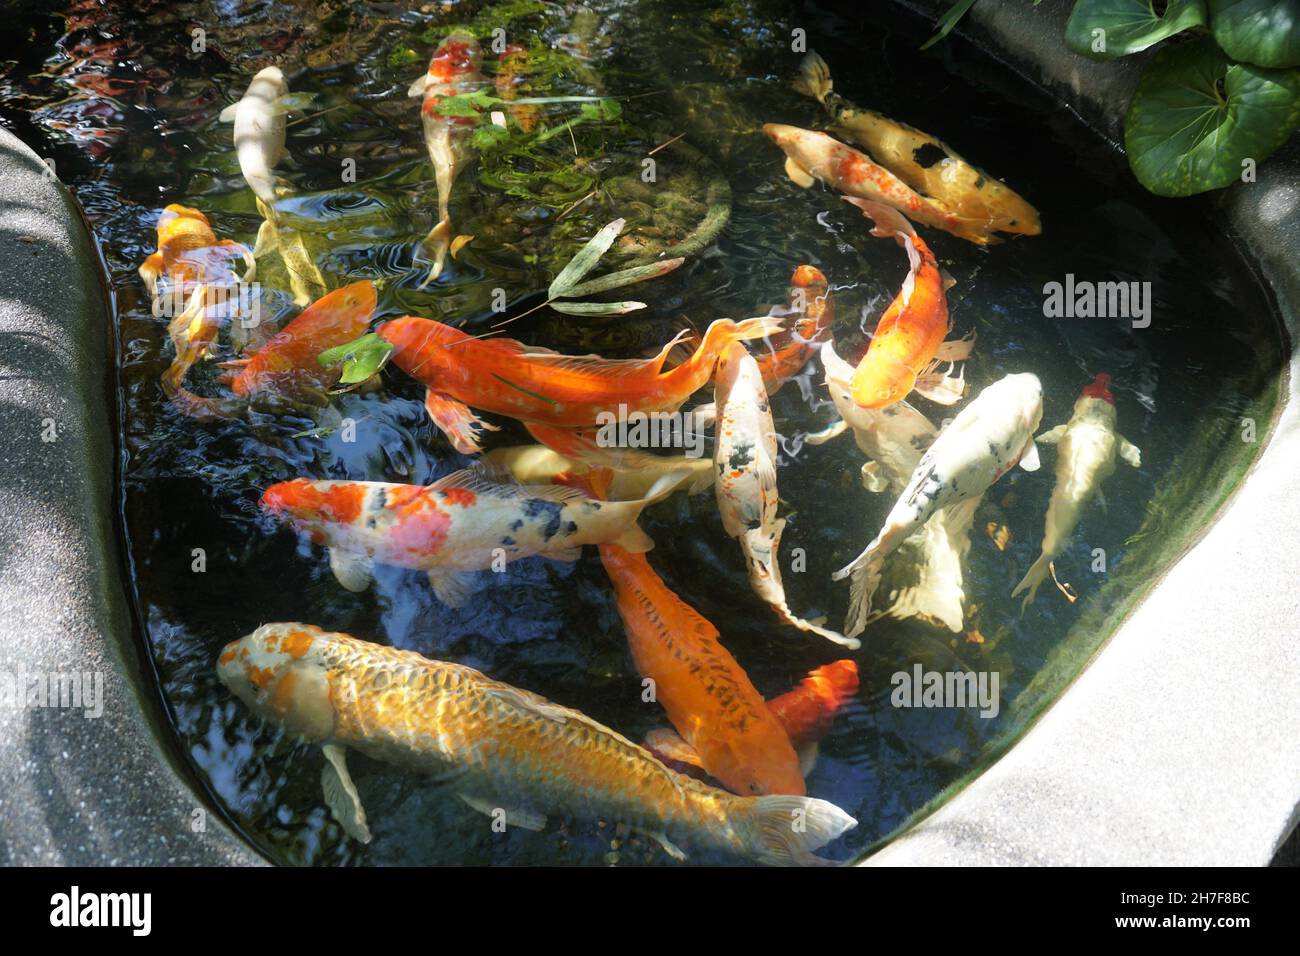 Mixed colors and shapes of koi fish on the surface of a pond Stock ...